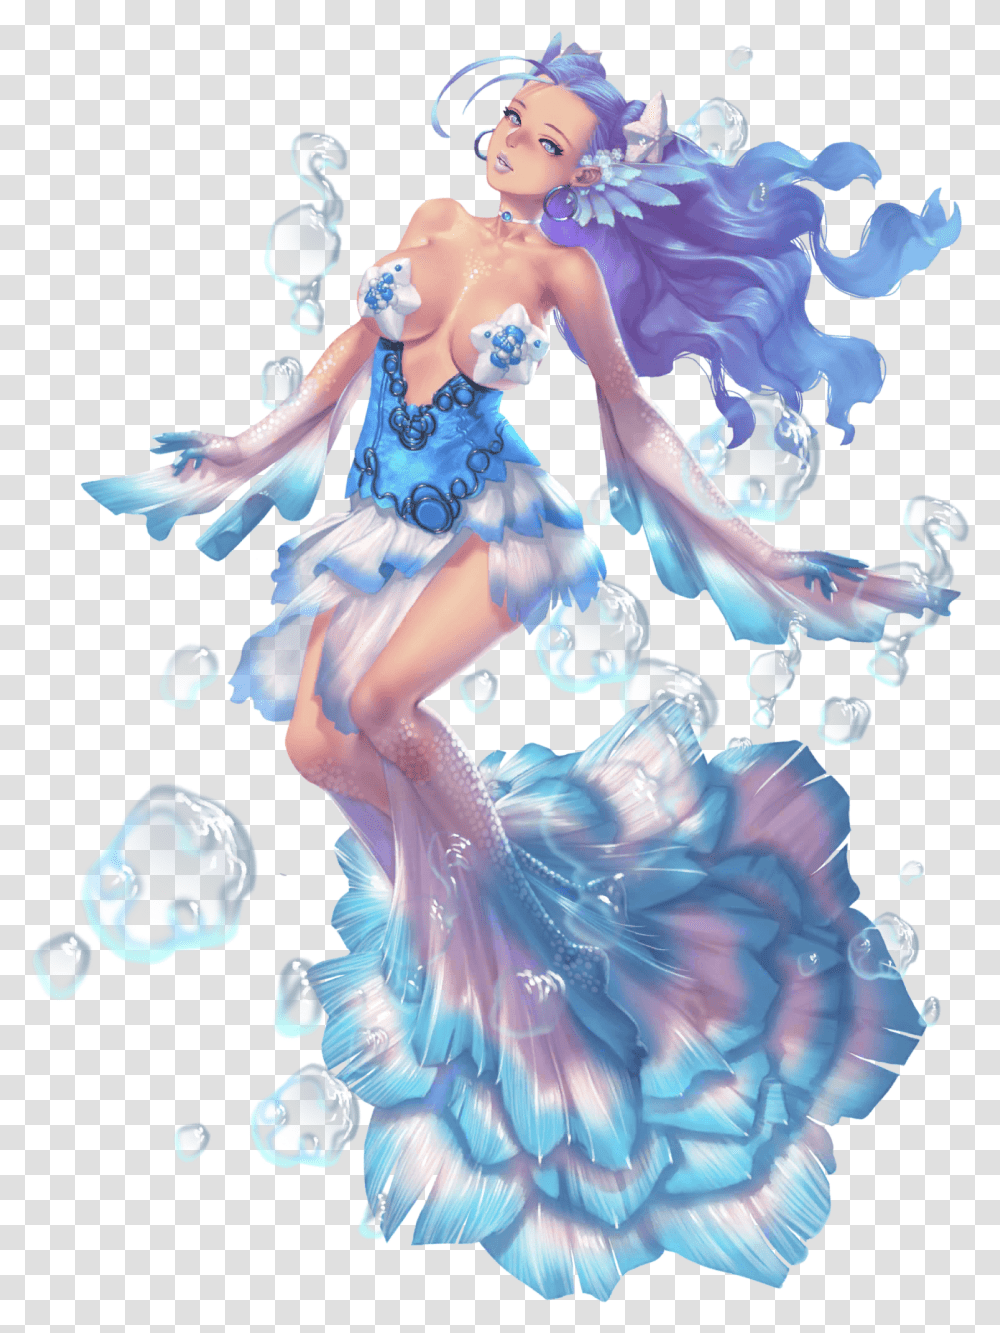 Crystal Maidens Wiki Fairy, Leisure Activities, Floral Design Transparent Png